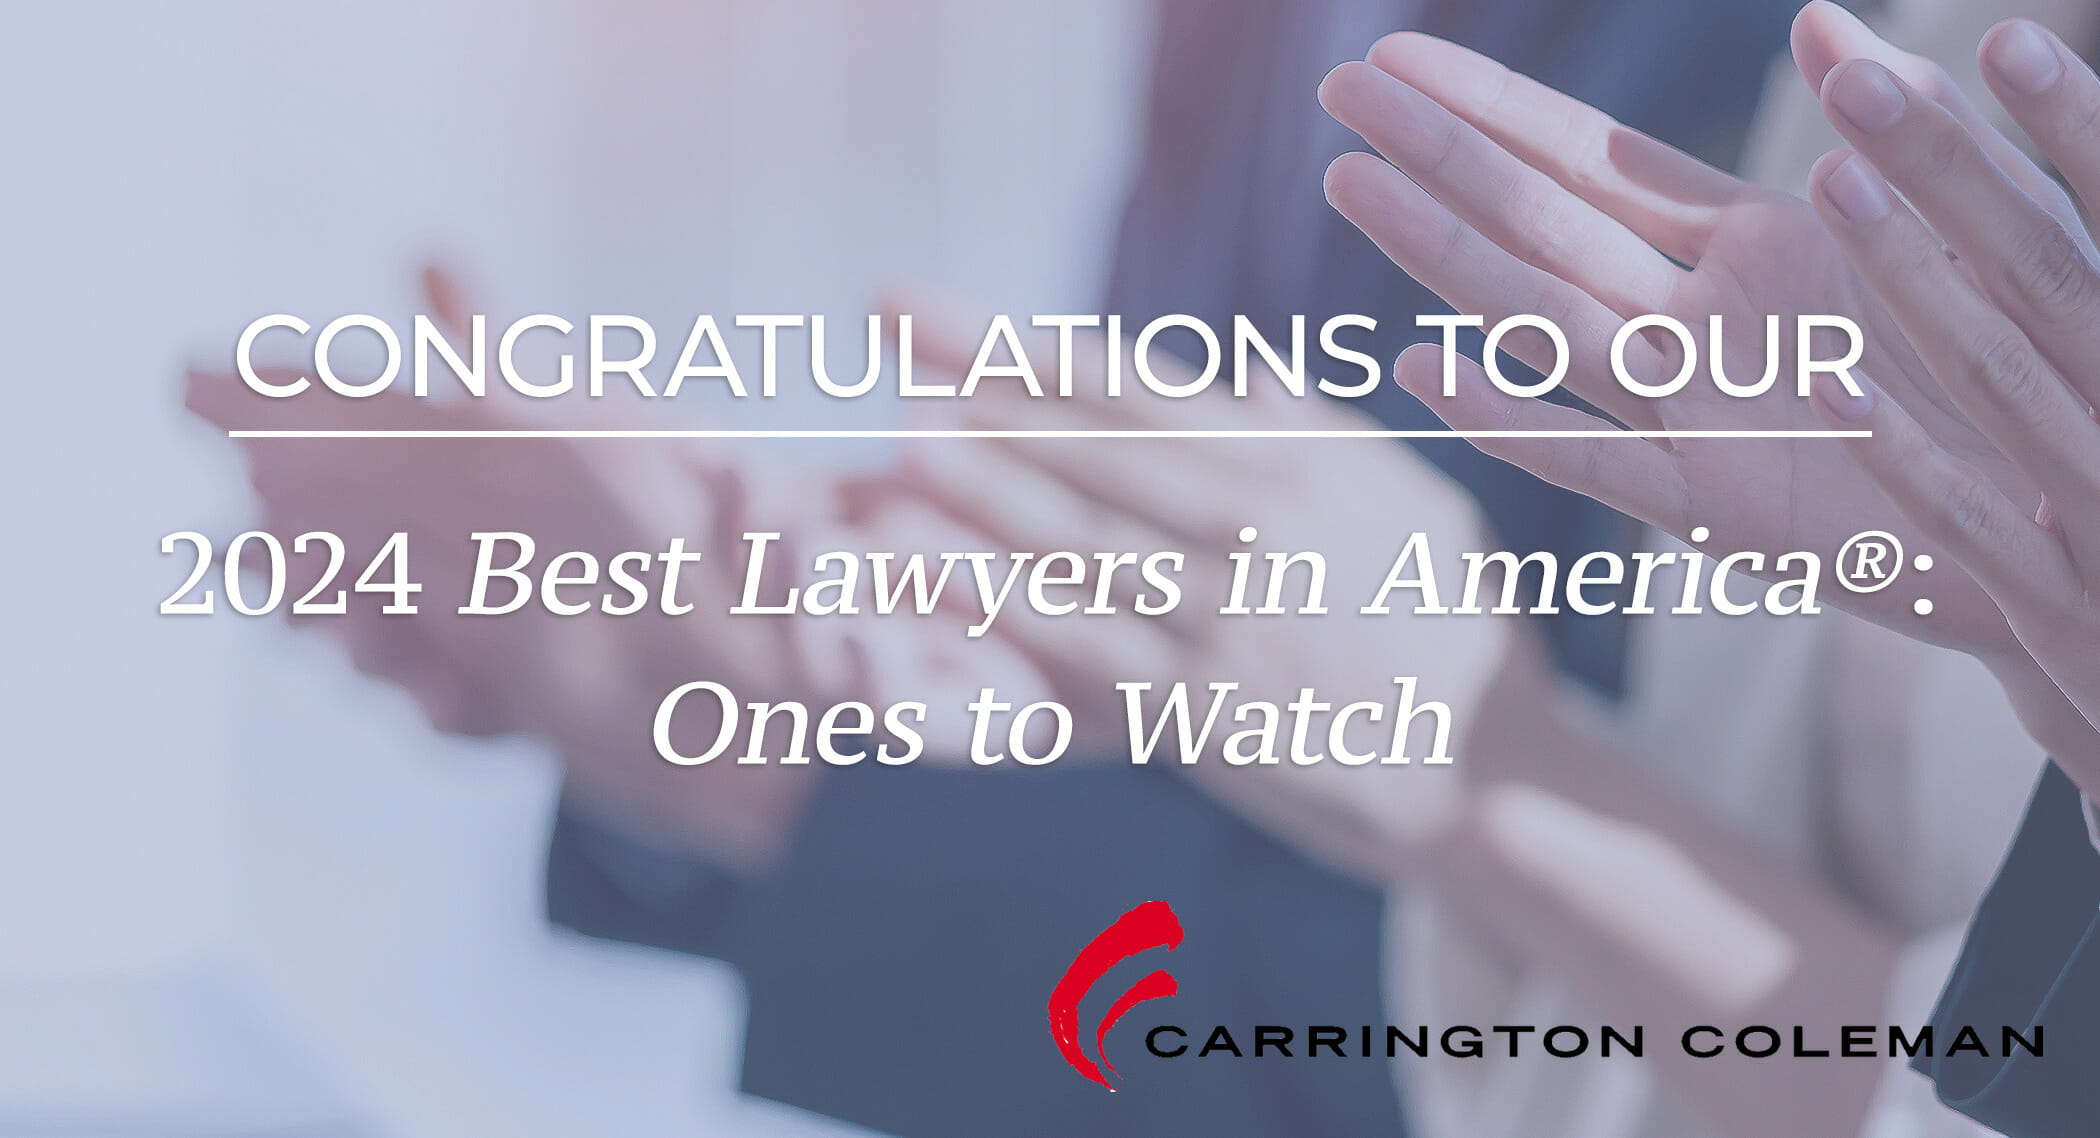 2024 Best Lawyers Ones to Watch Listing Honors 18 Carrington Coleman